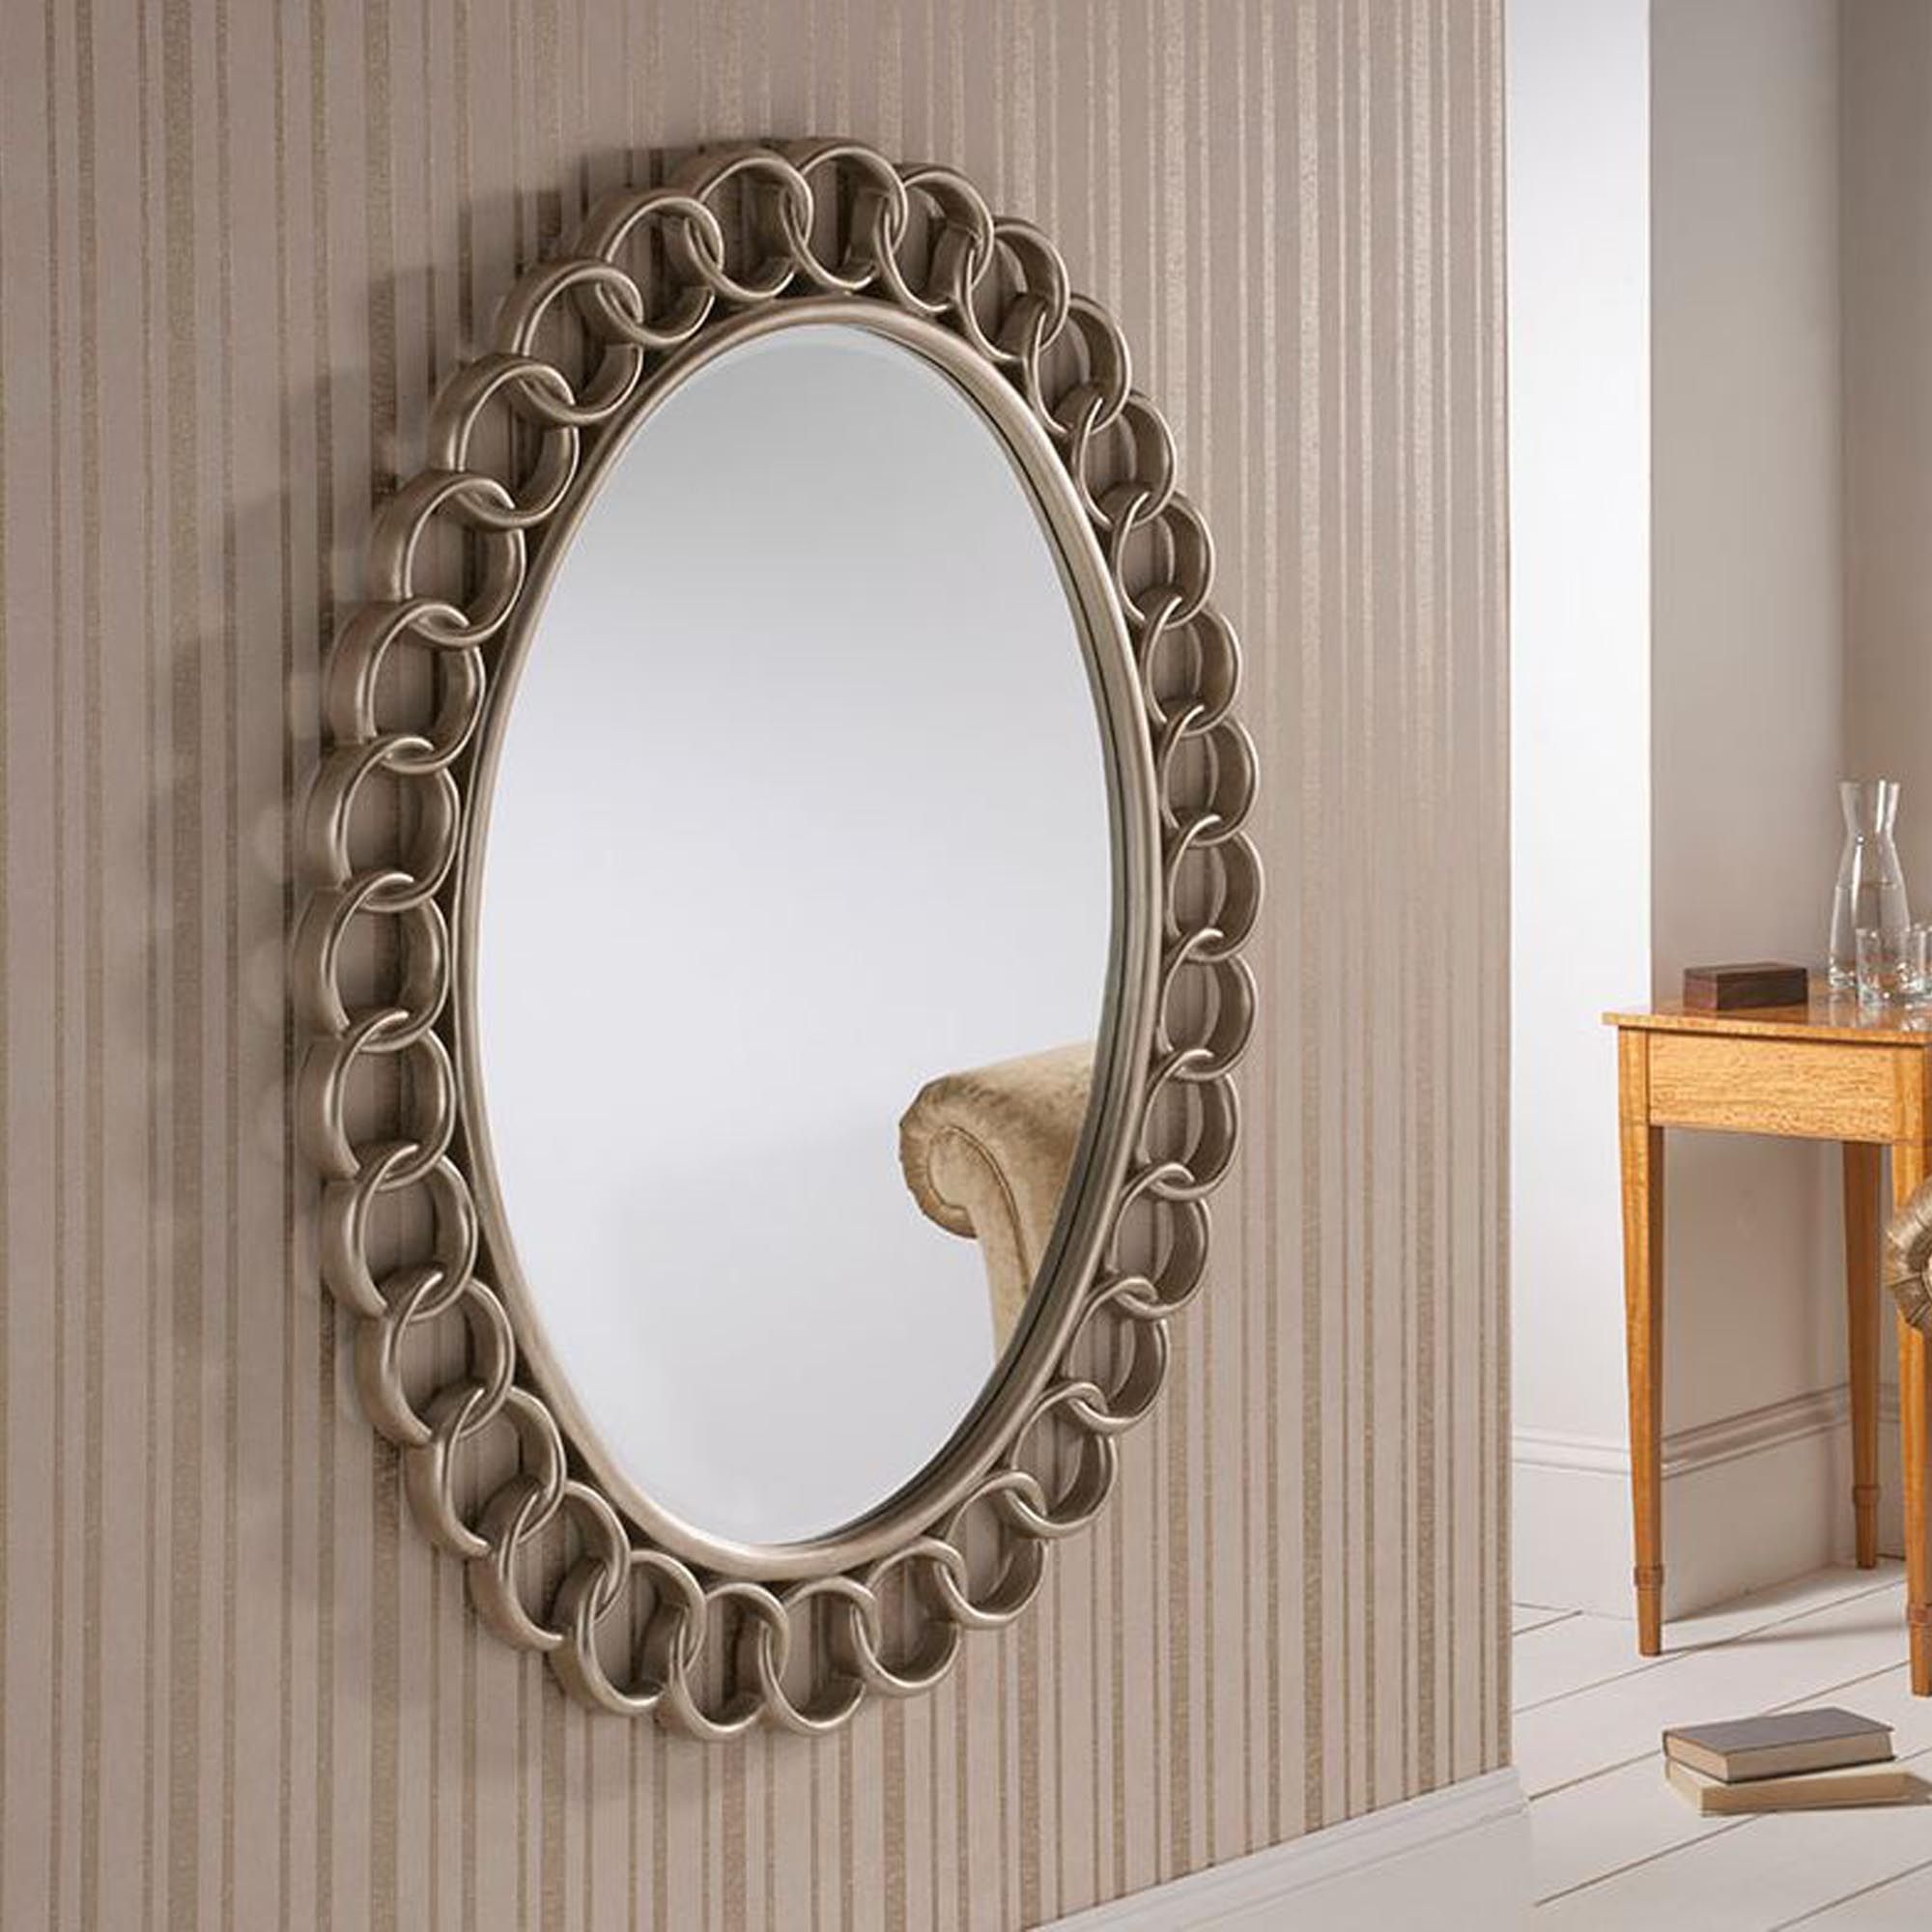 Loop Link Contemporary Silver Wall Mirror | Homesdirect365 For Wall Mirrors (View 11 of 15)